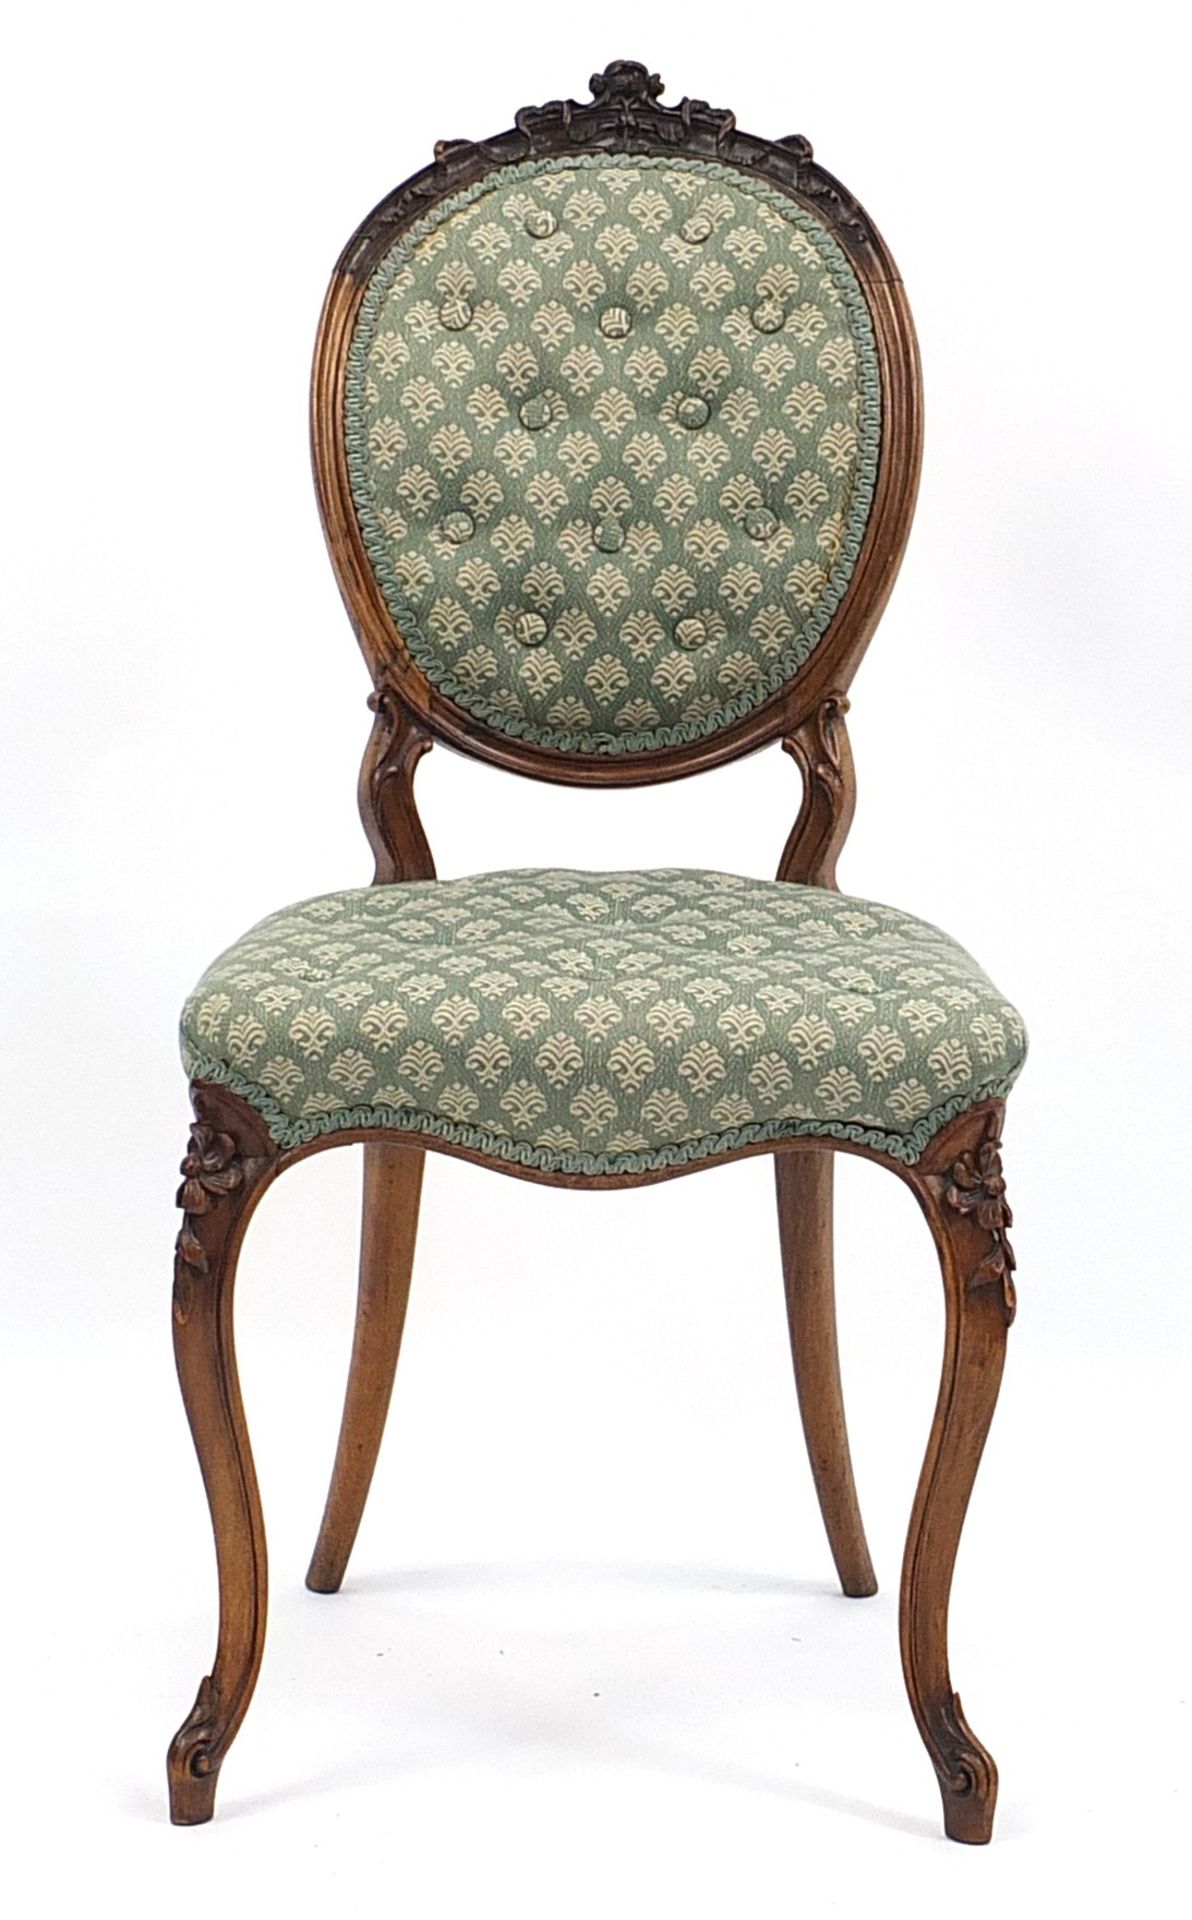 Victorian walnut occasional chair with buttonback upholstery, 88cm high - Image 2 of 3